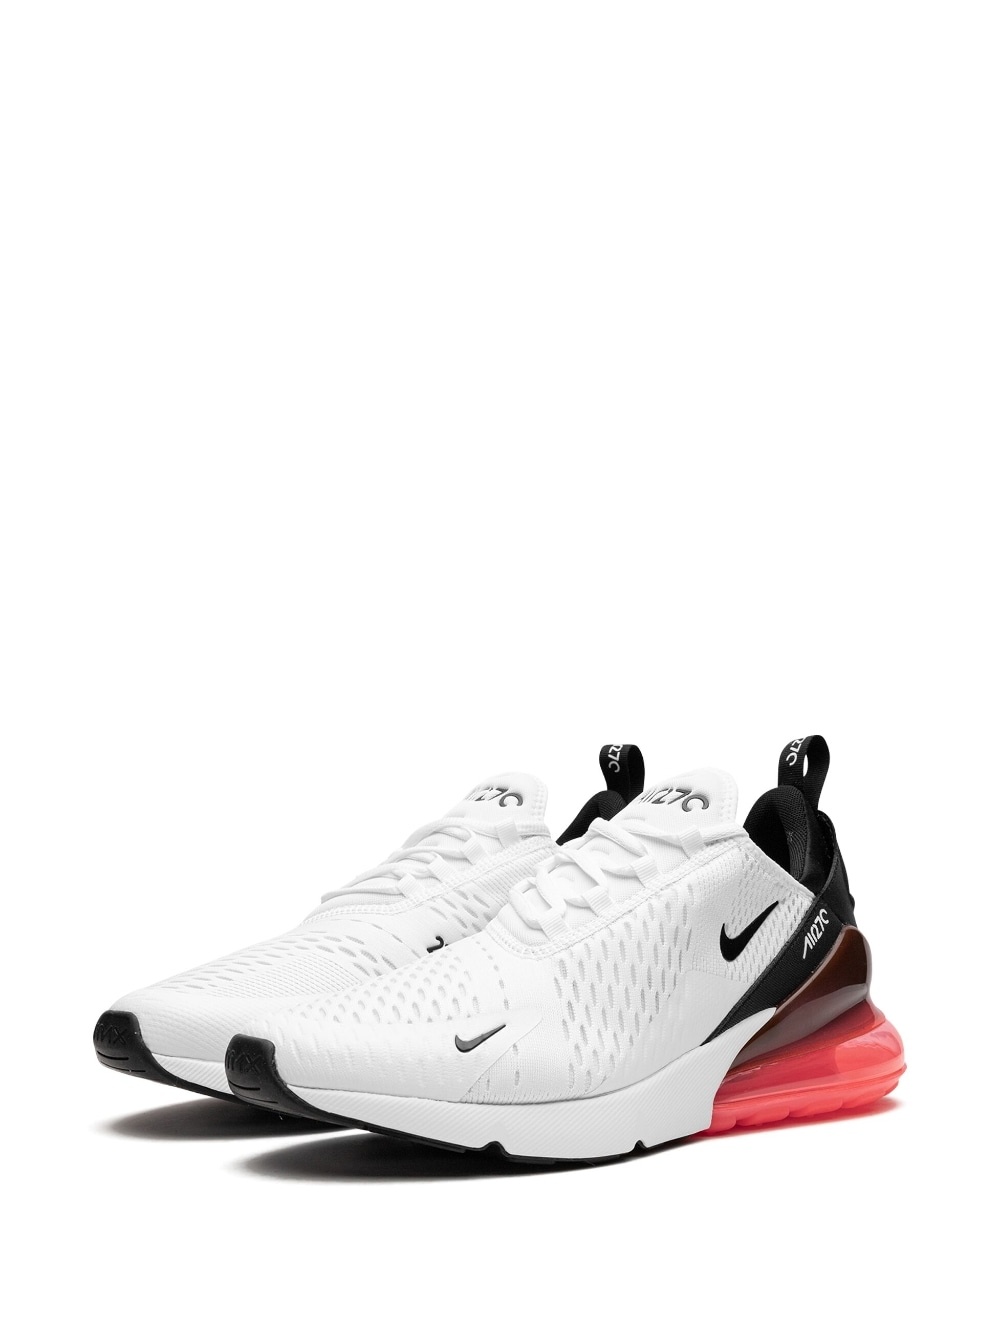 Air Max 270 "White Hot Punch" sneakers - 5